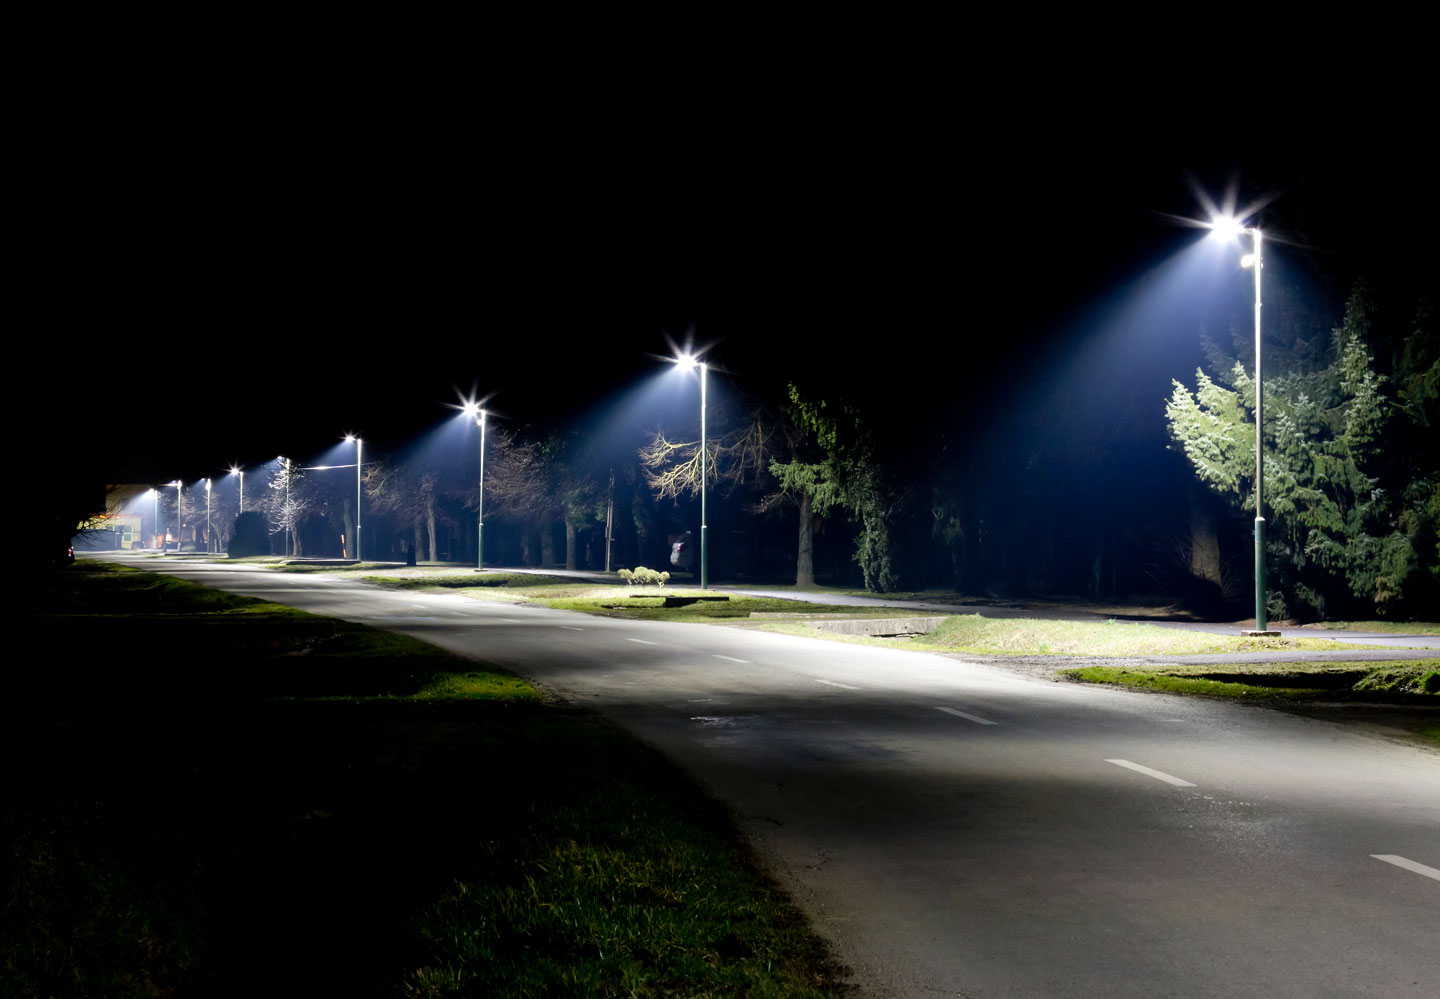 A row of streelights lighting a rural road at night